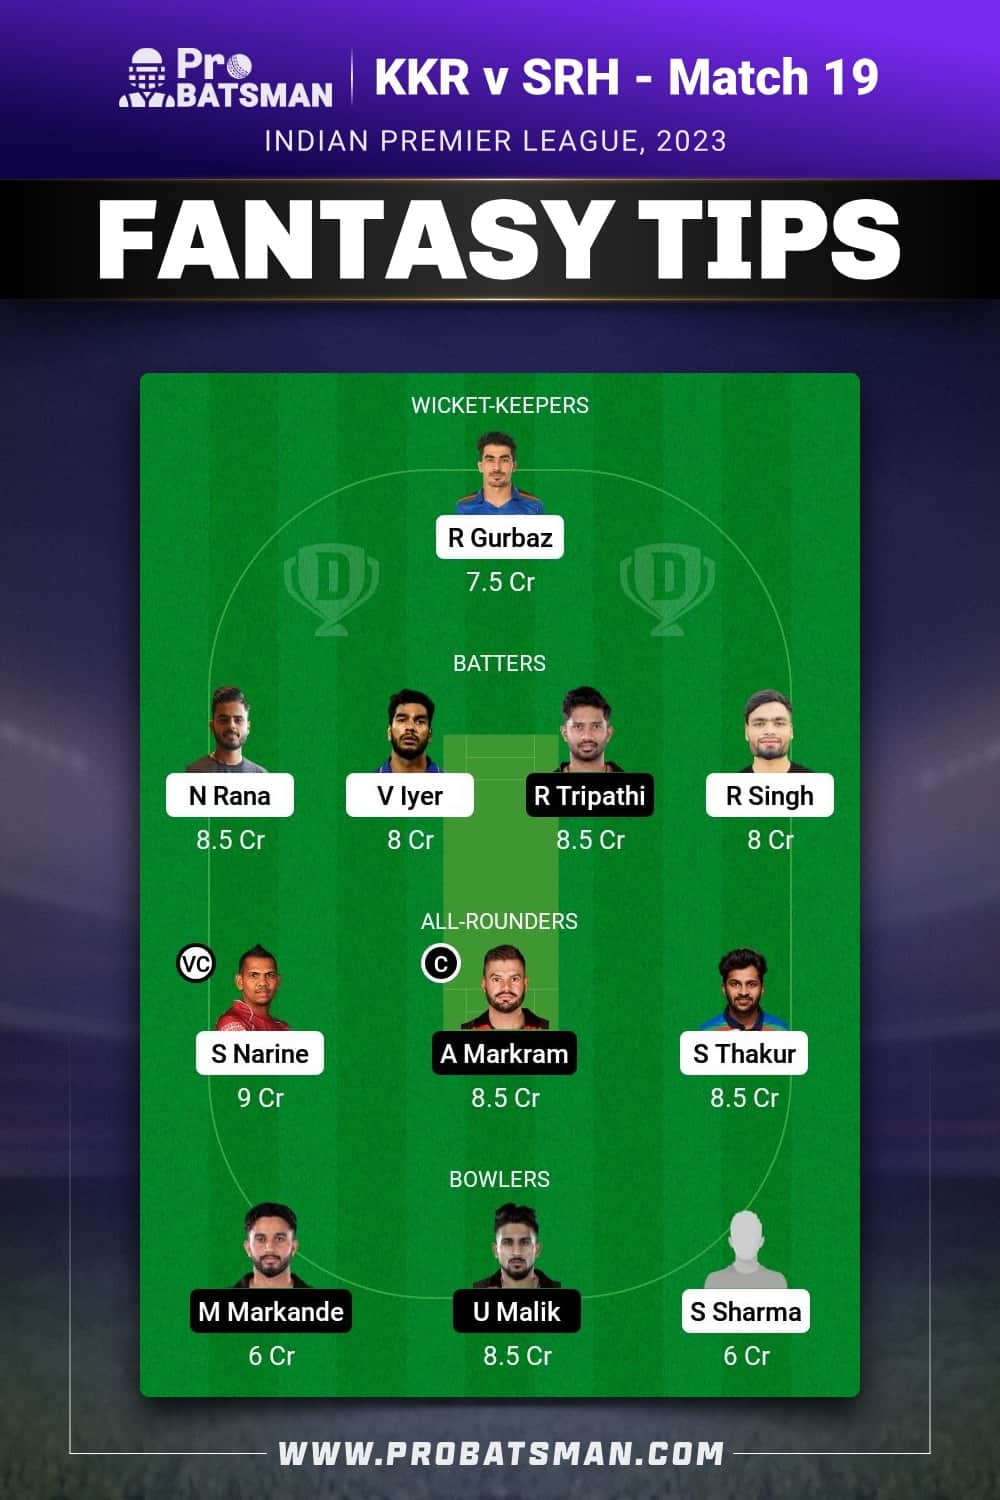 KOL vs SRH Dream11 Prediction With Stats, Pitch Report & Player Record of IPL 2023 For Match 19